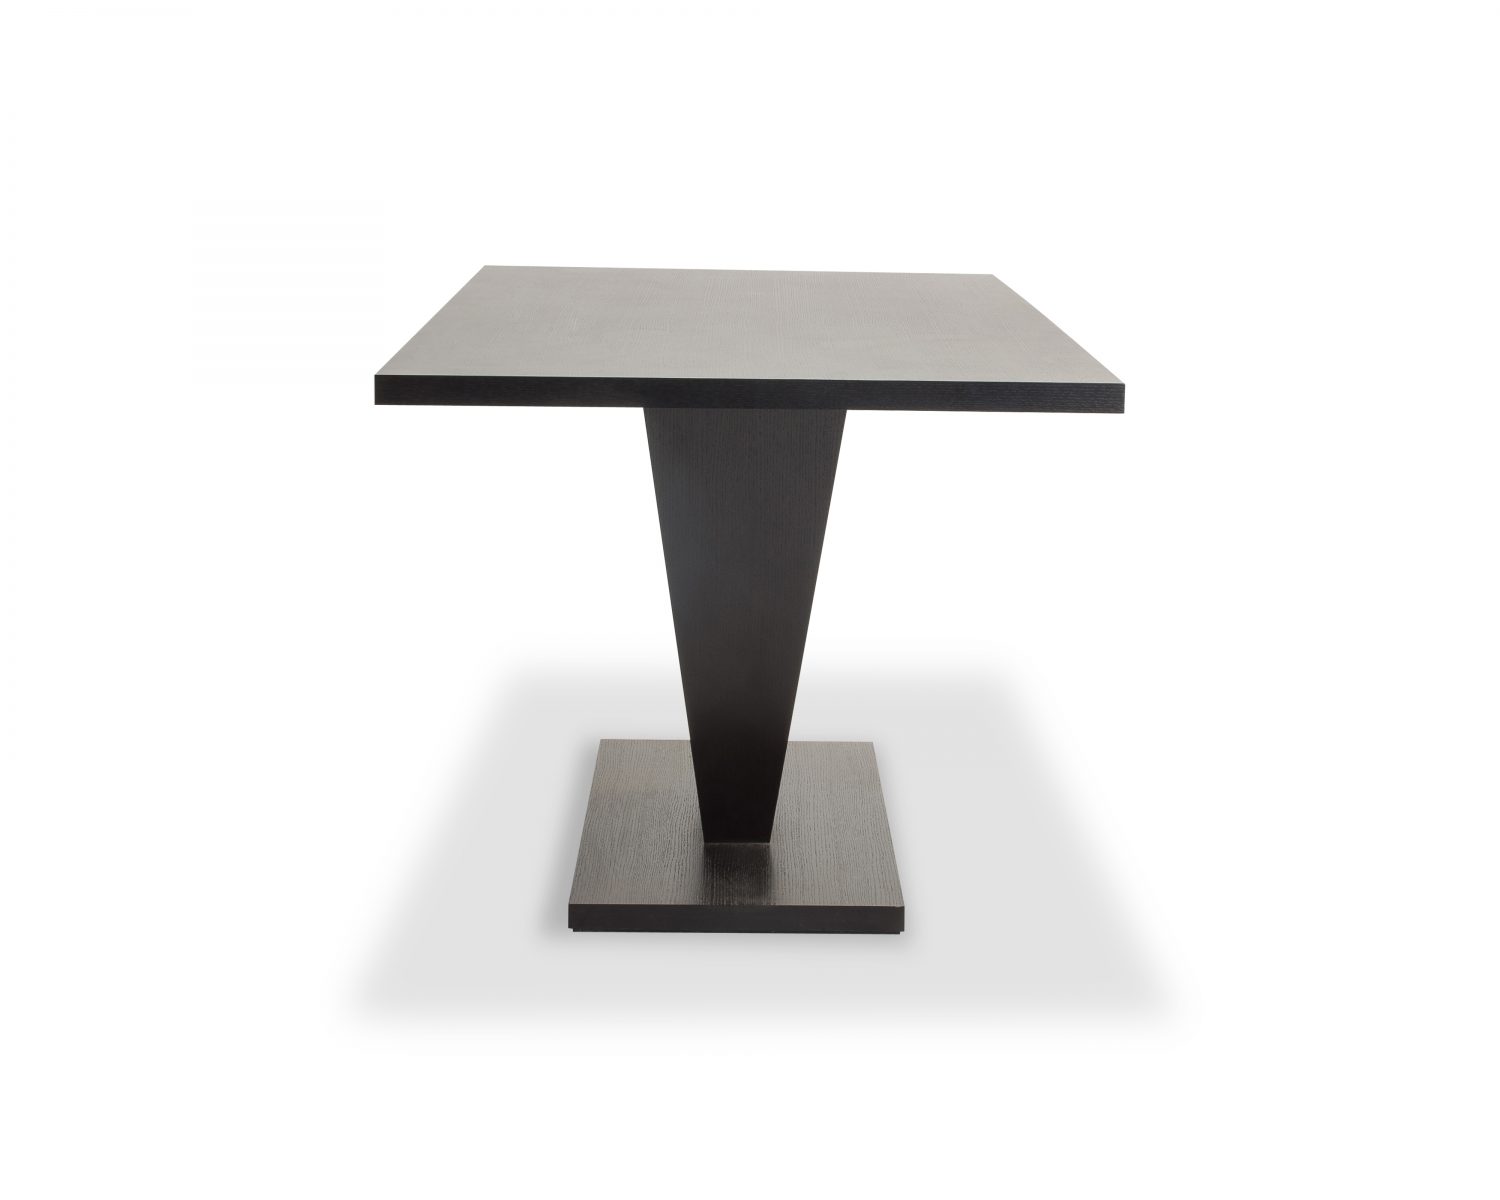  LiangAndEimil-Liang & Eimil Dorset Dining Table- 13 